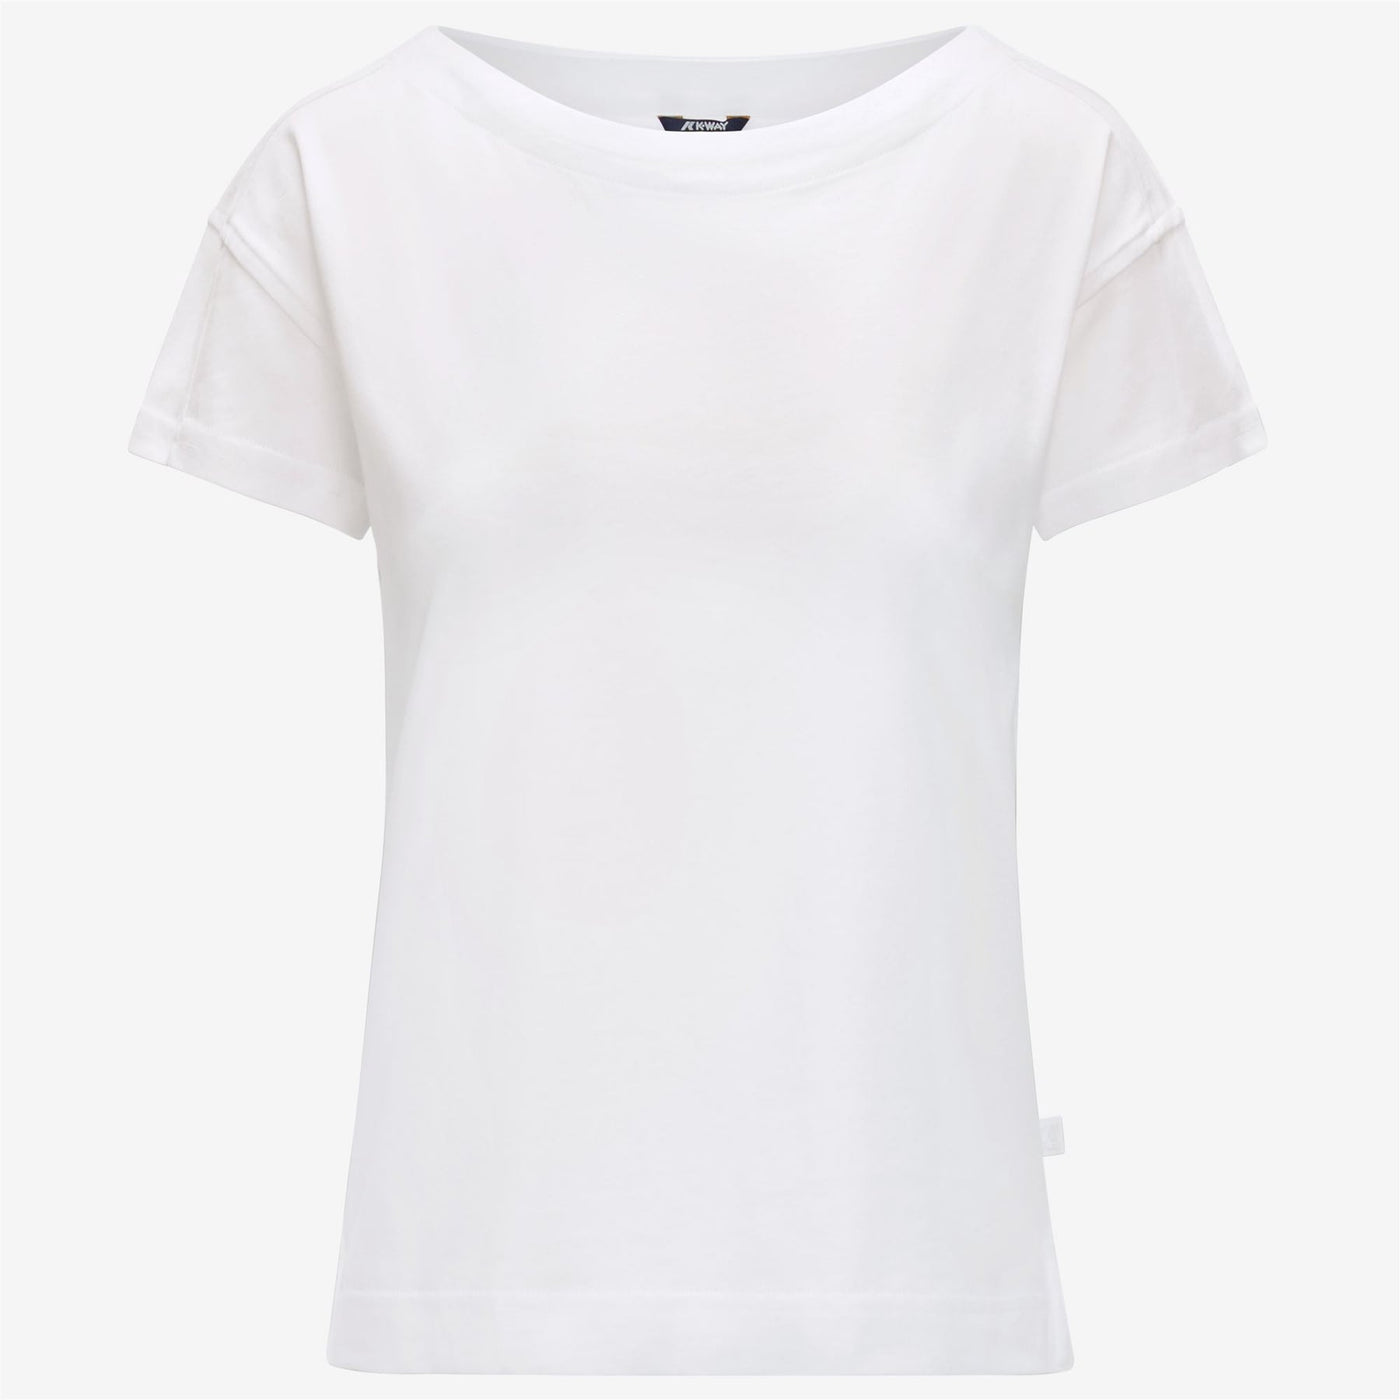 RORY - T-SHIRTS & TOP - WOMAN - WHITE